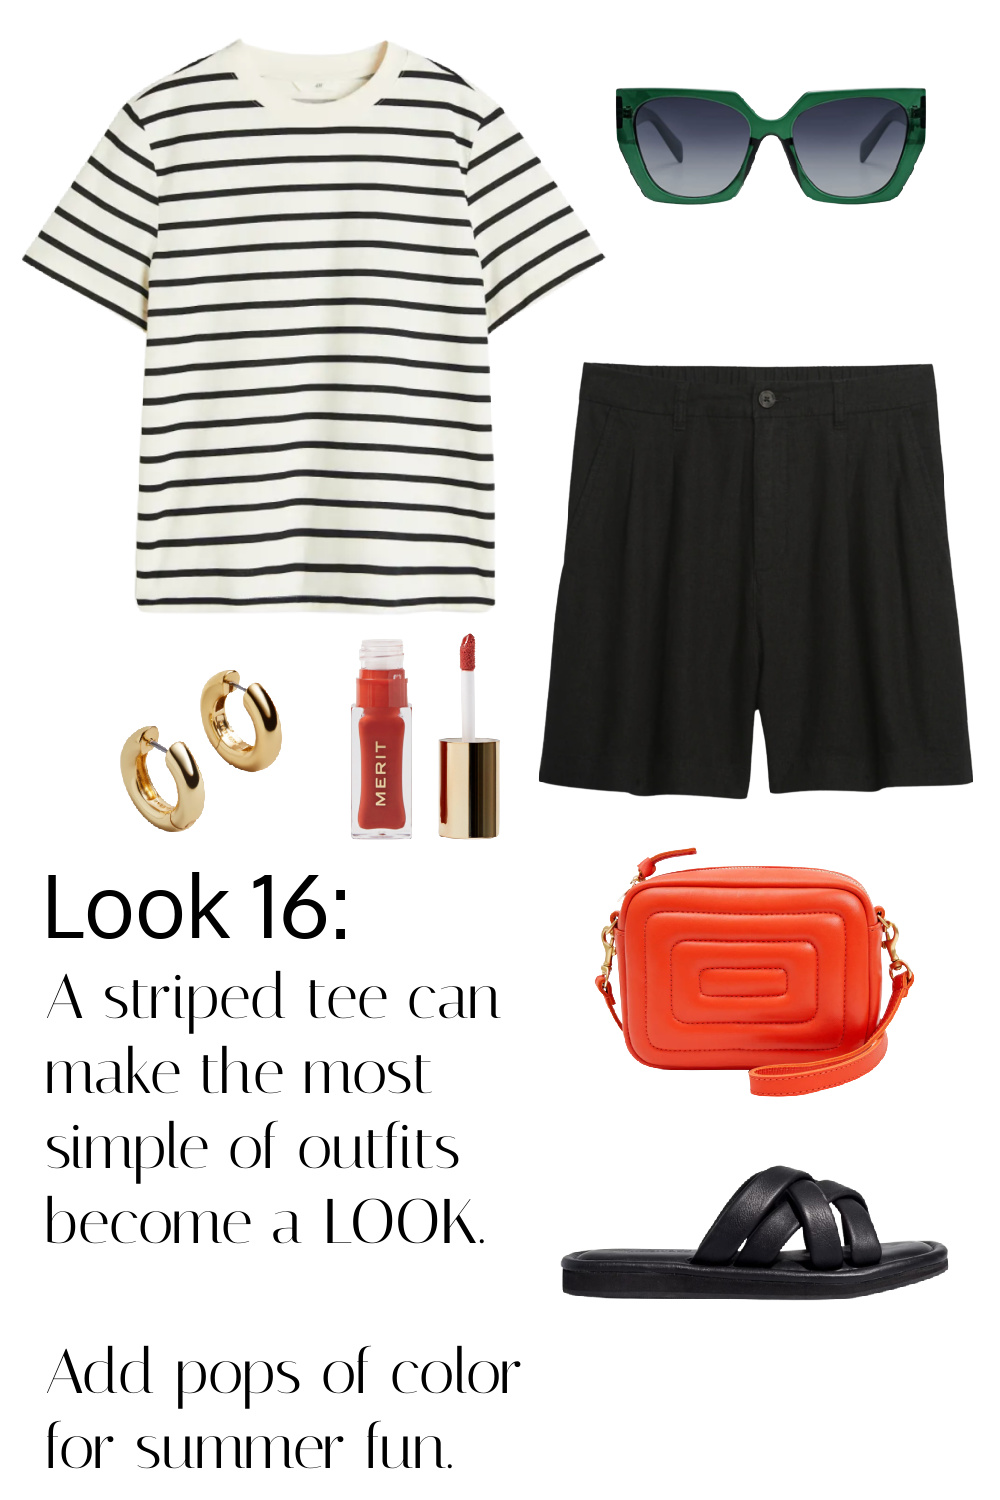 The cream and black striped t-shirt with the black linen shorts. A striped tee can make the most simple of outfits become a LOOK. Add pops of color for summer fun.